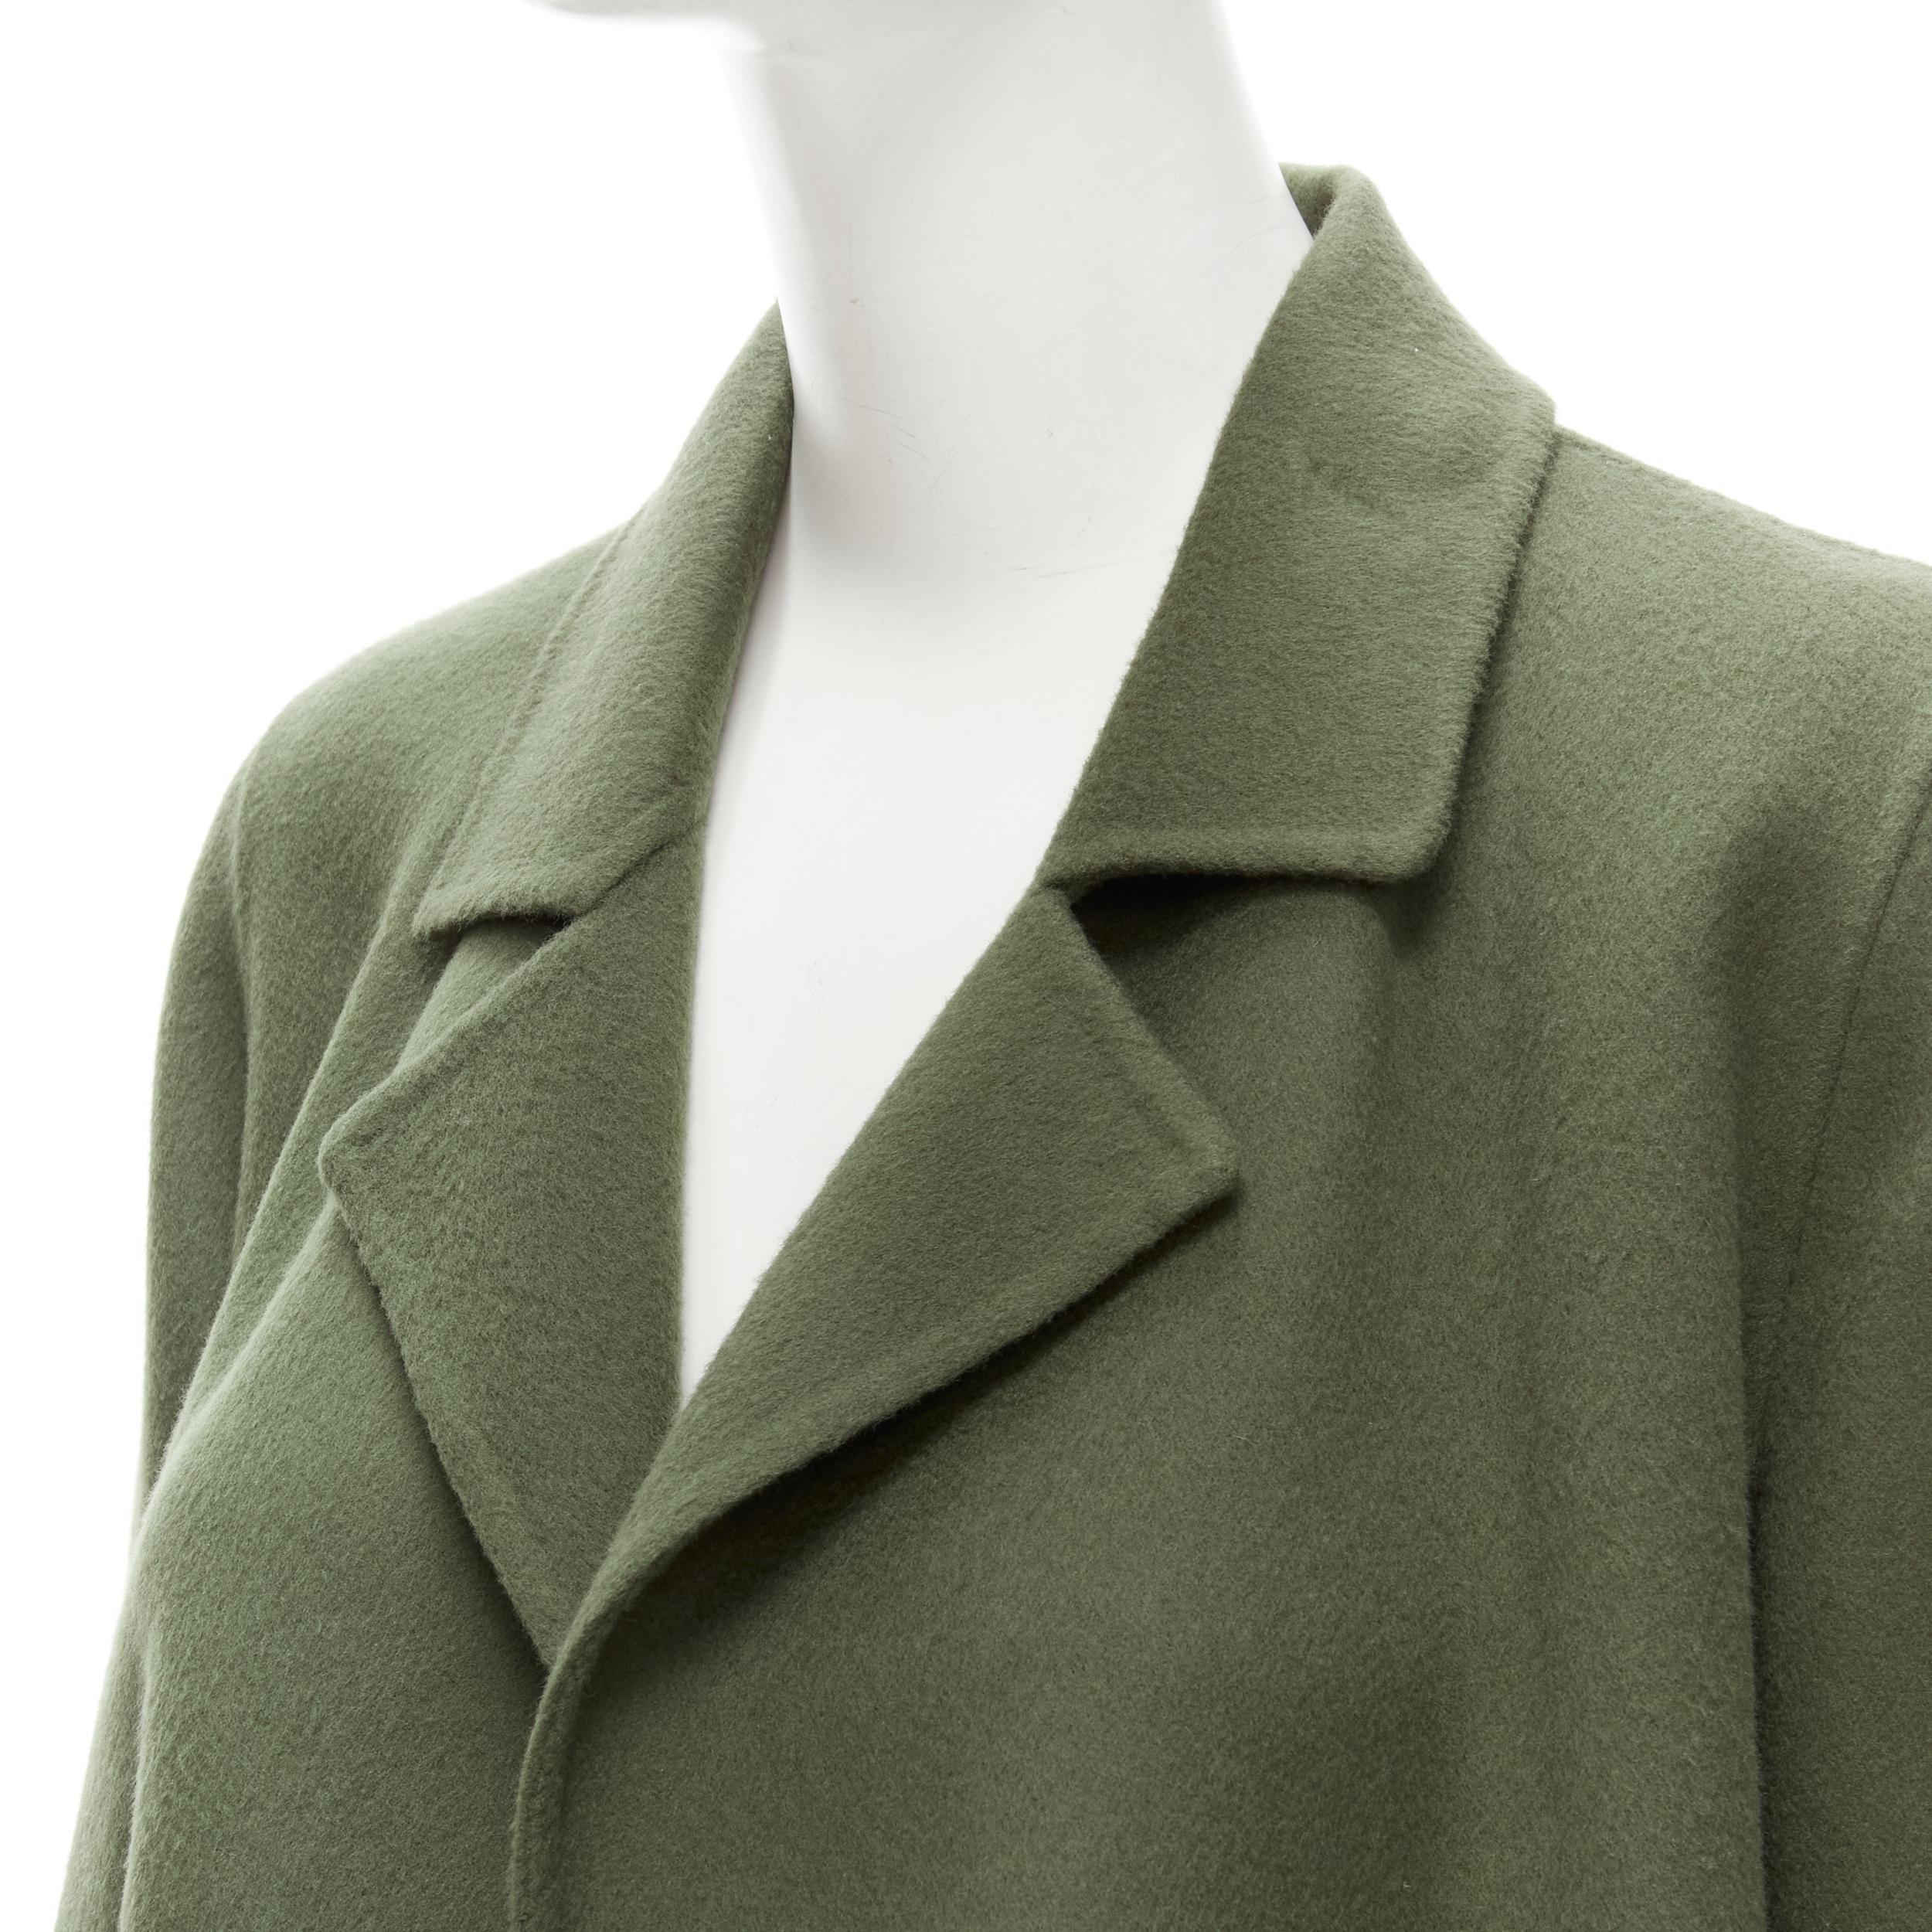 new THEORY military green wool cashmere blend soft draped collar unlined coat S
Brand: Theory
Material: Wool
Color: Green
Pattern: Solid
Extra Detail: Open soft draped collar. Dual front pockets.
Made in: China

CONDITION:
Condition: New with tags.